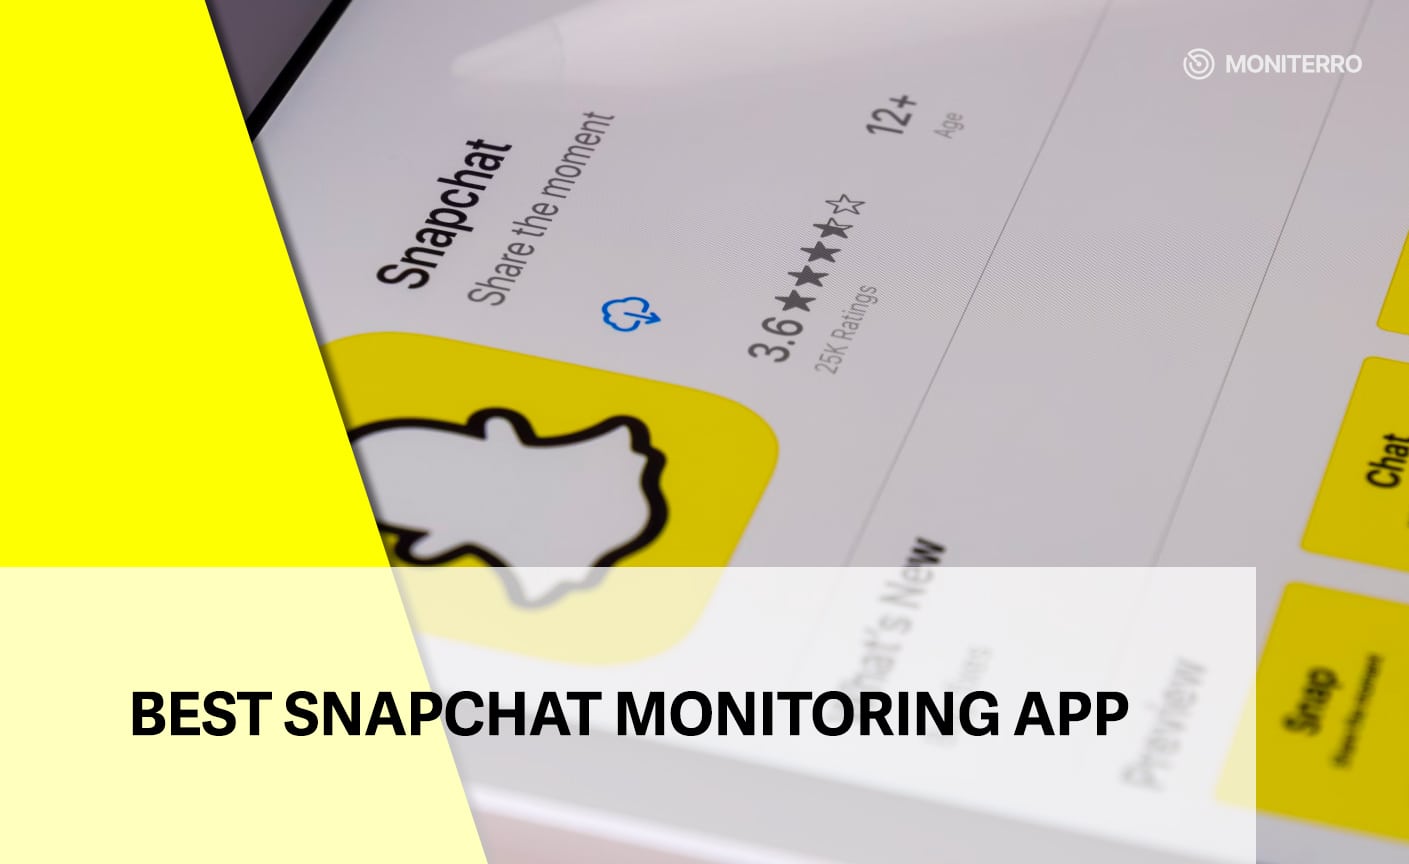 Best Snapchat Monitoring App Options to Take Advantage Of